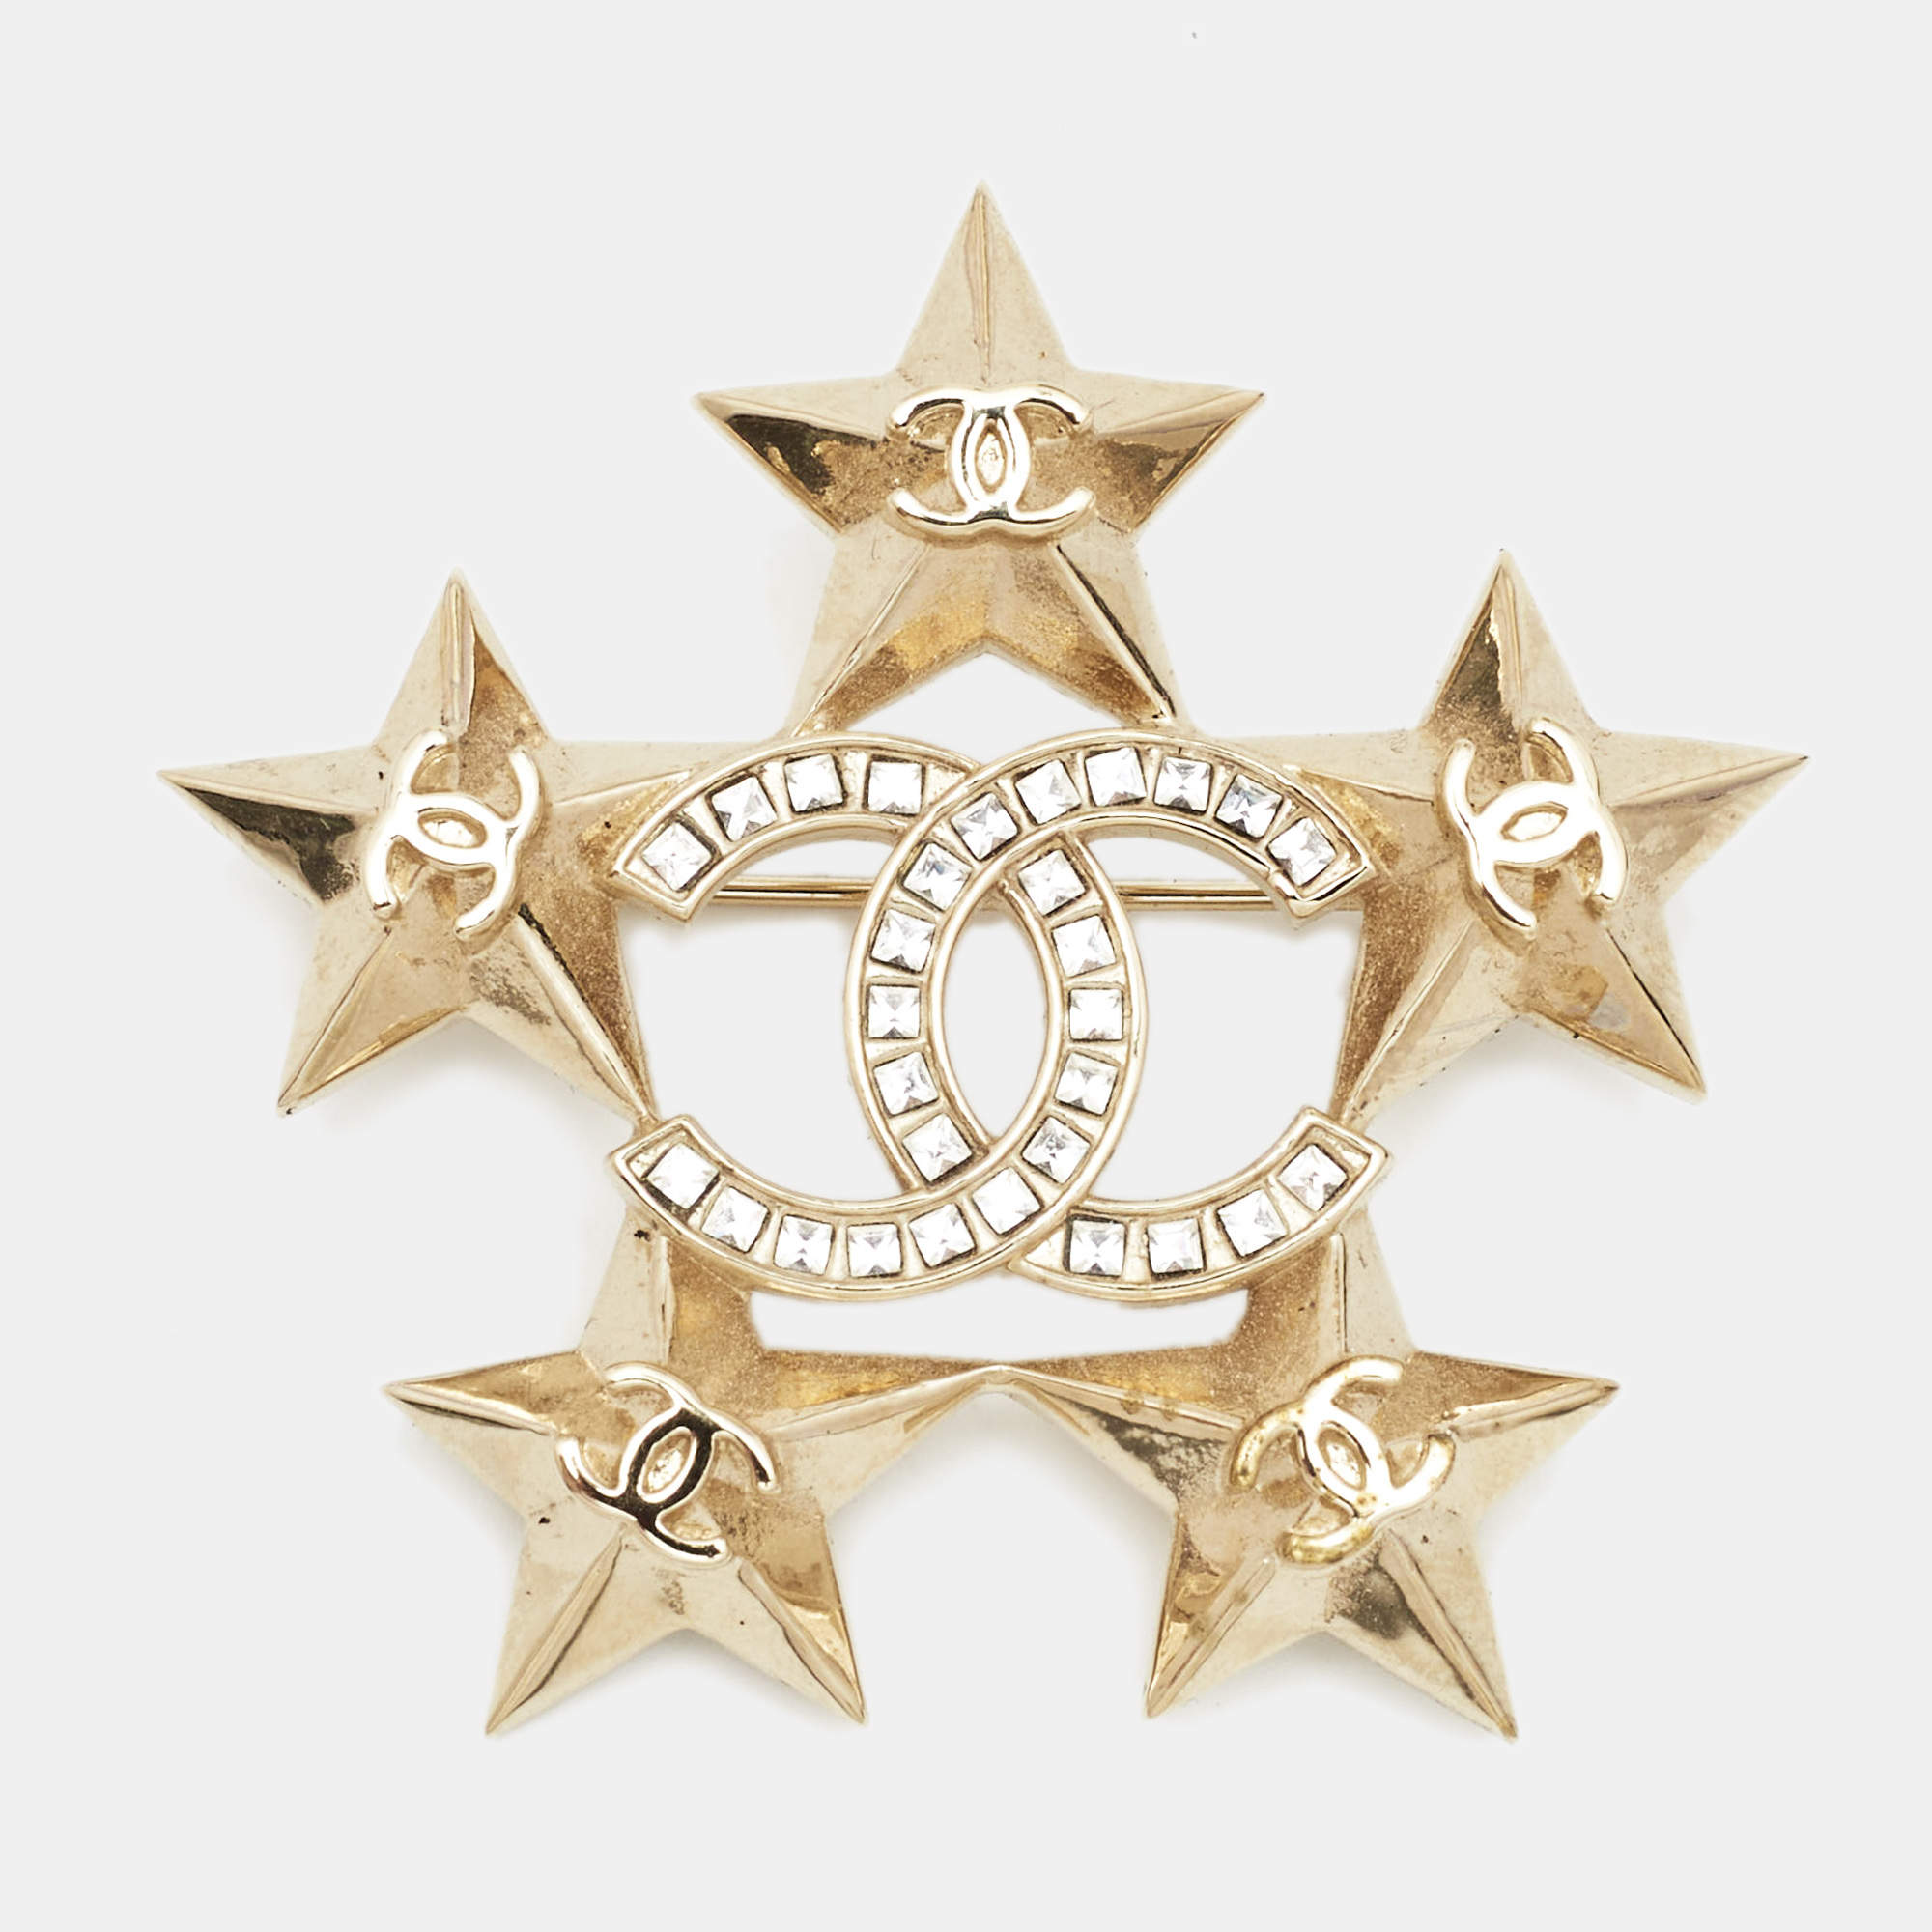 Chanel Gold Tone Baguette Crystal CC Star Pin Brooch